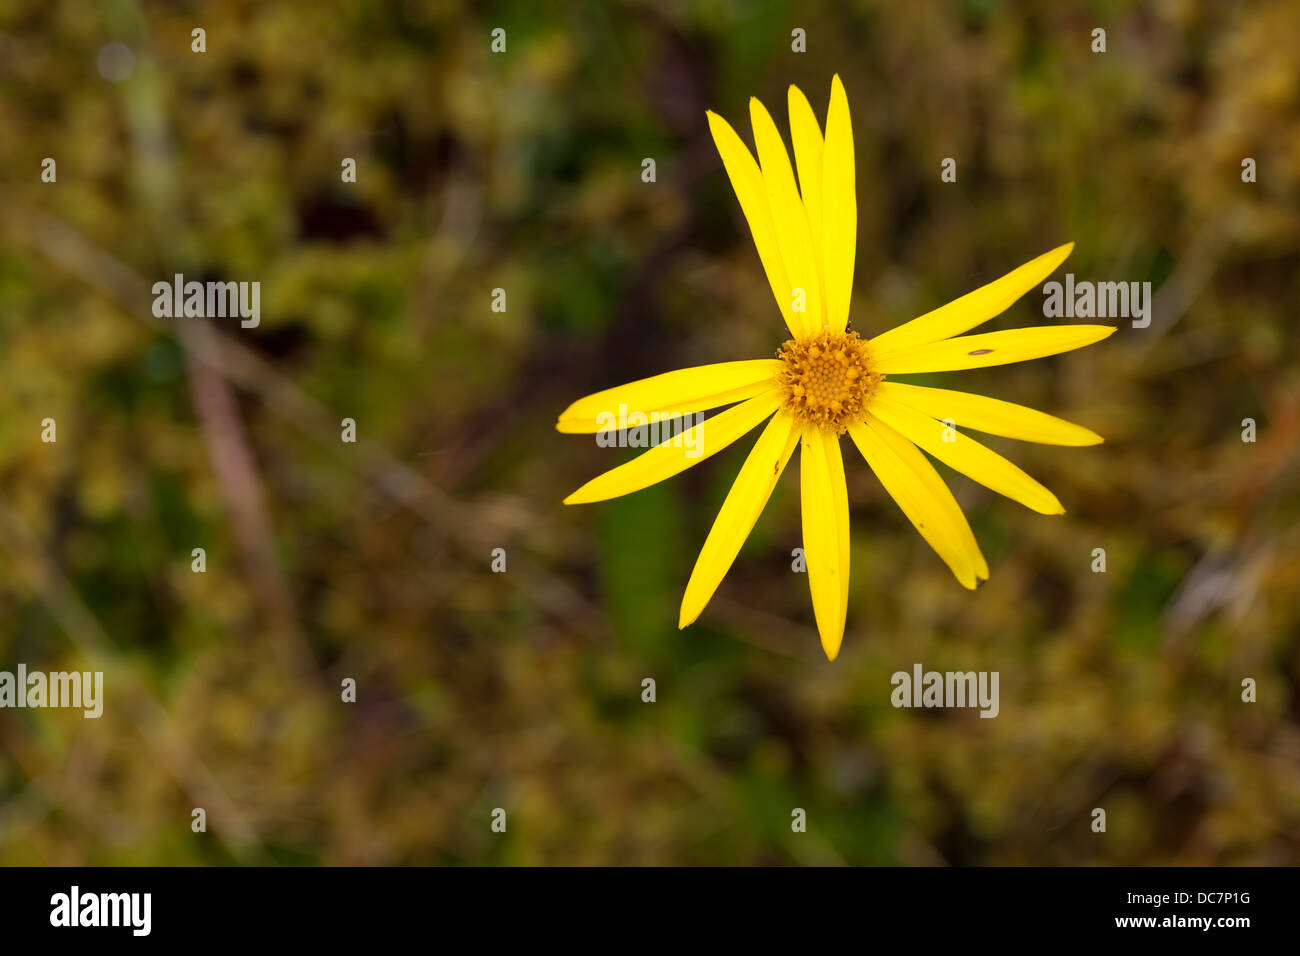 Download Yellow Flower Petals High Angle Shot Stock Photo Alamy Yellowimages Mockups